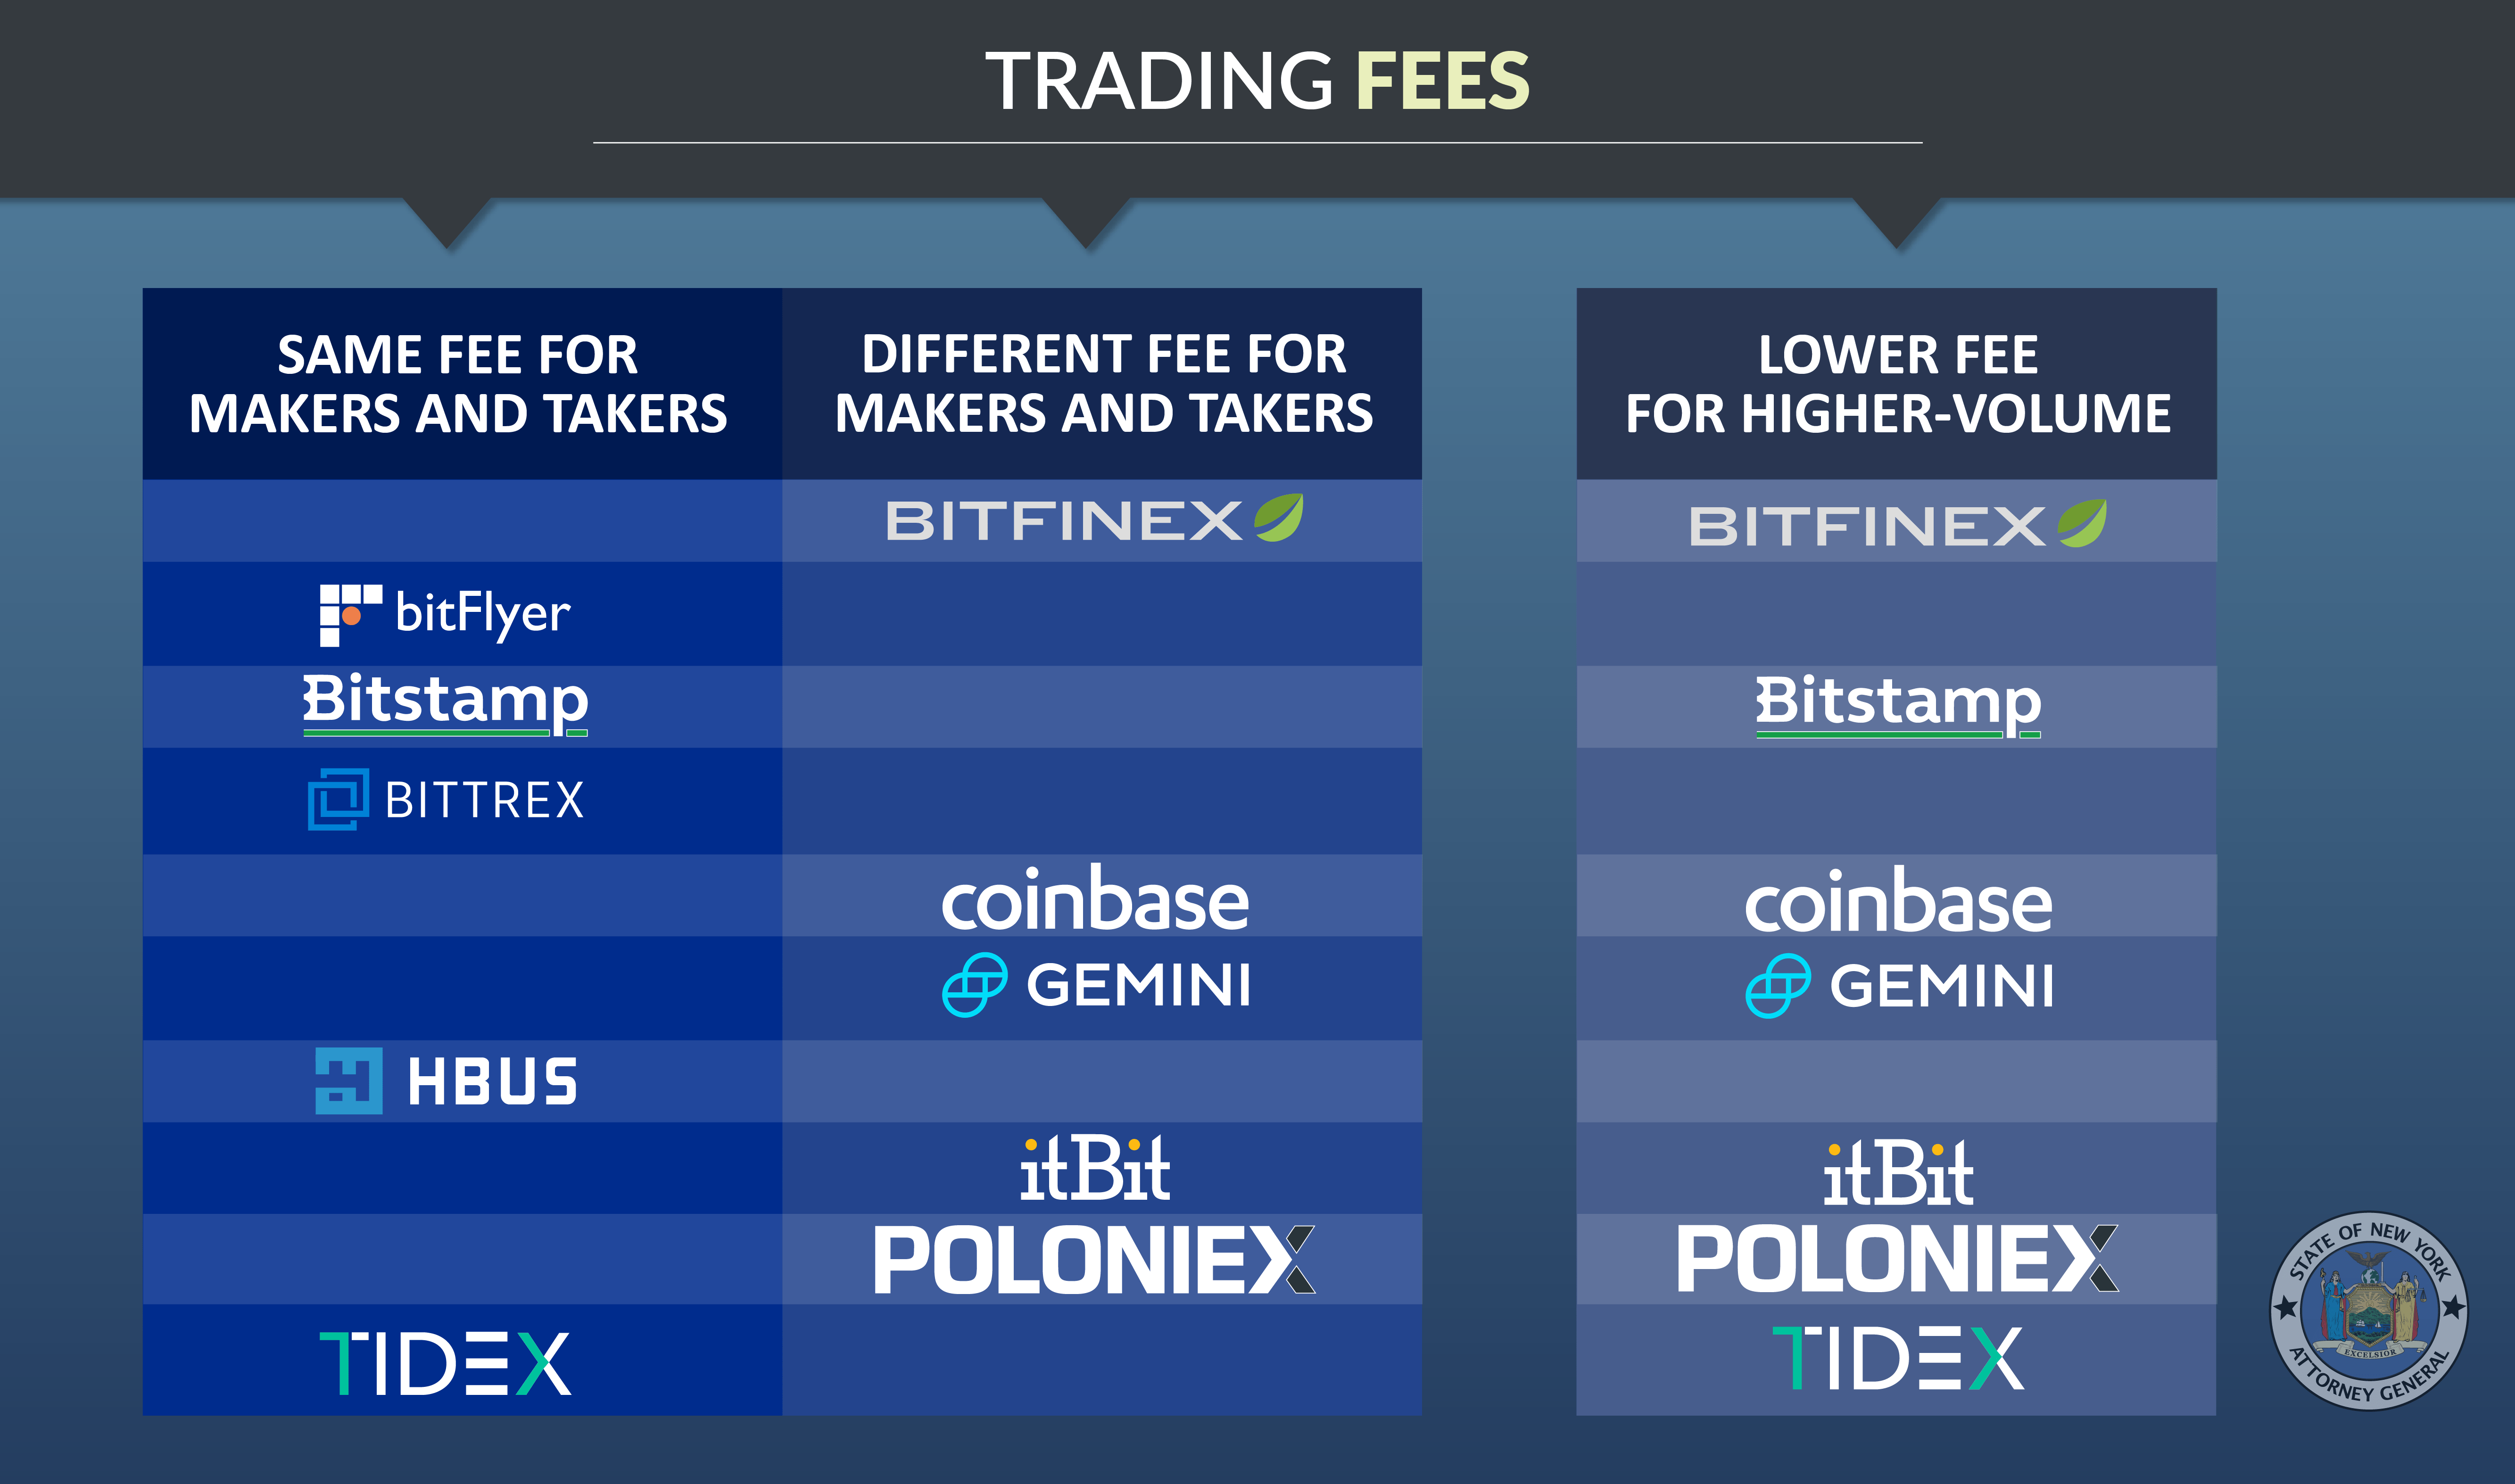 how long for btc transfer from coinbase to bittrex